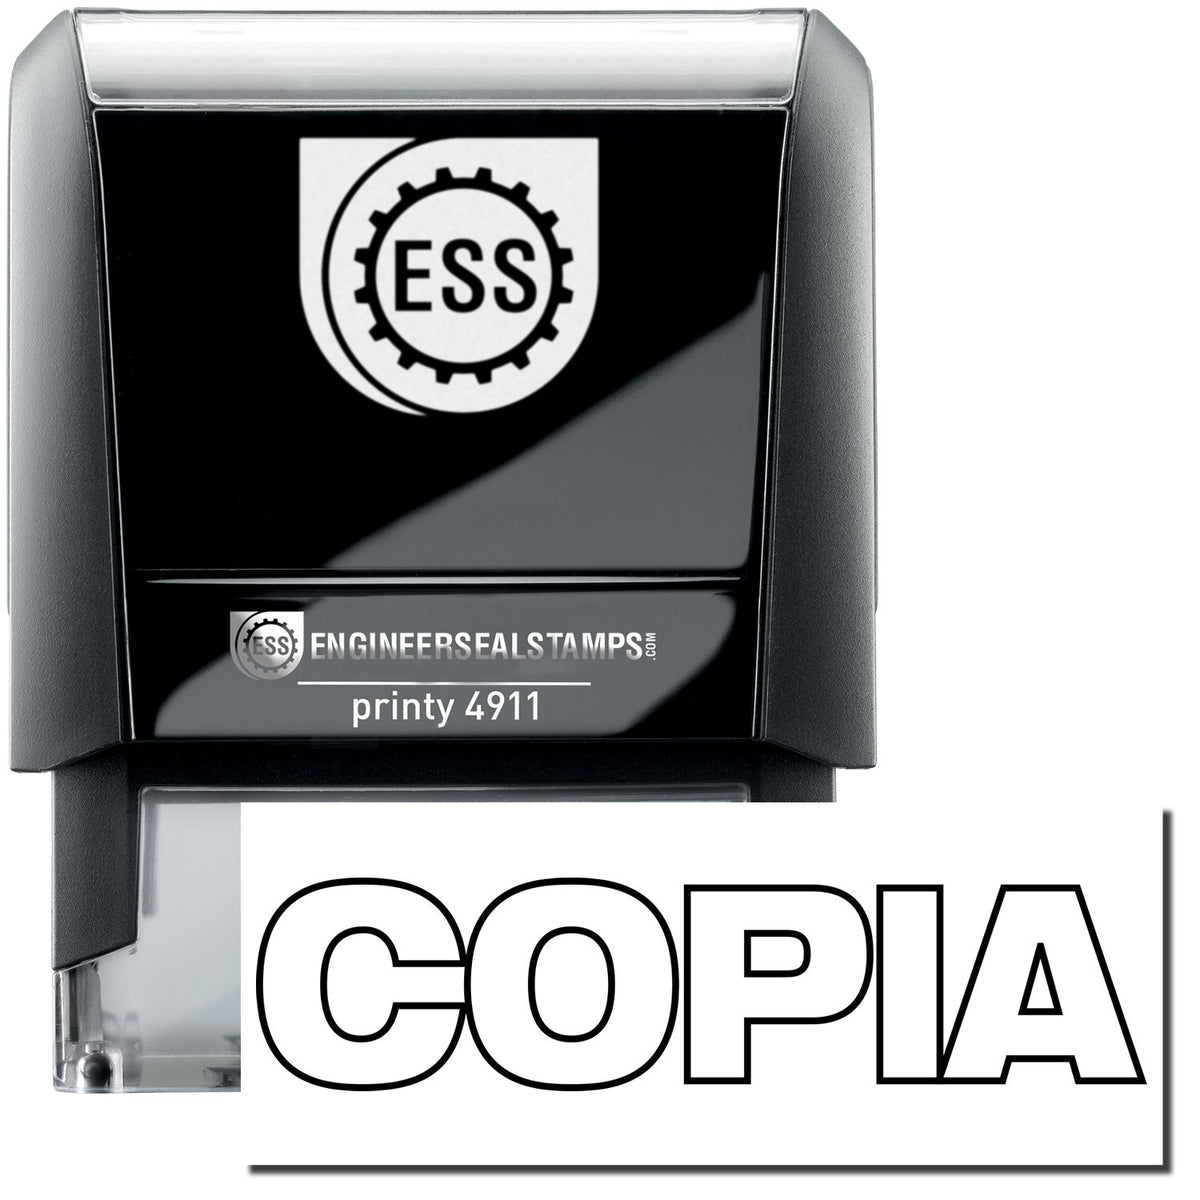 A self-inking stamp with a stamped image showing how the text &quot;COPIA&quot; in an outline style is displayed after stamping.